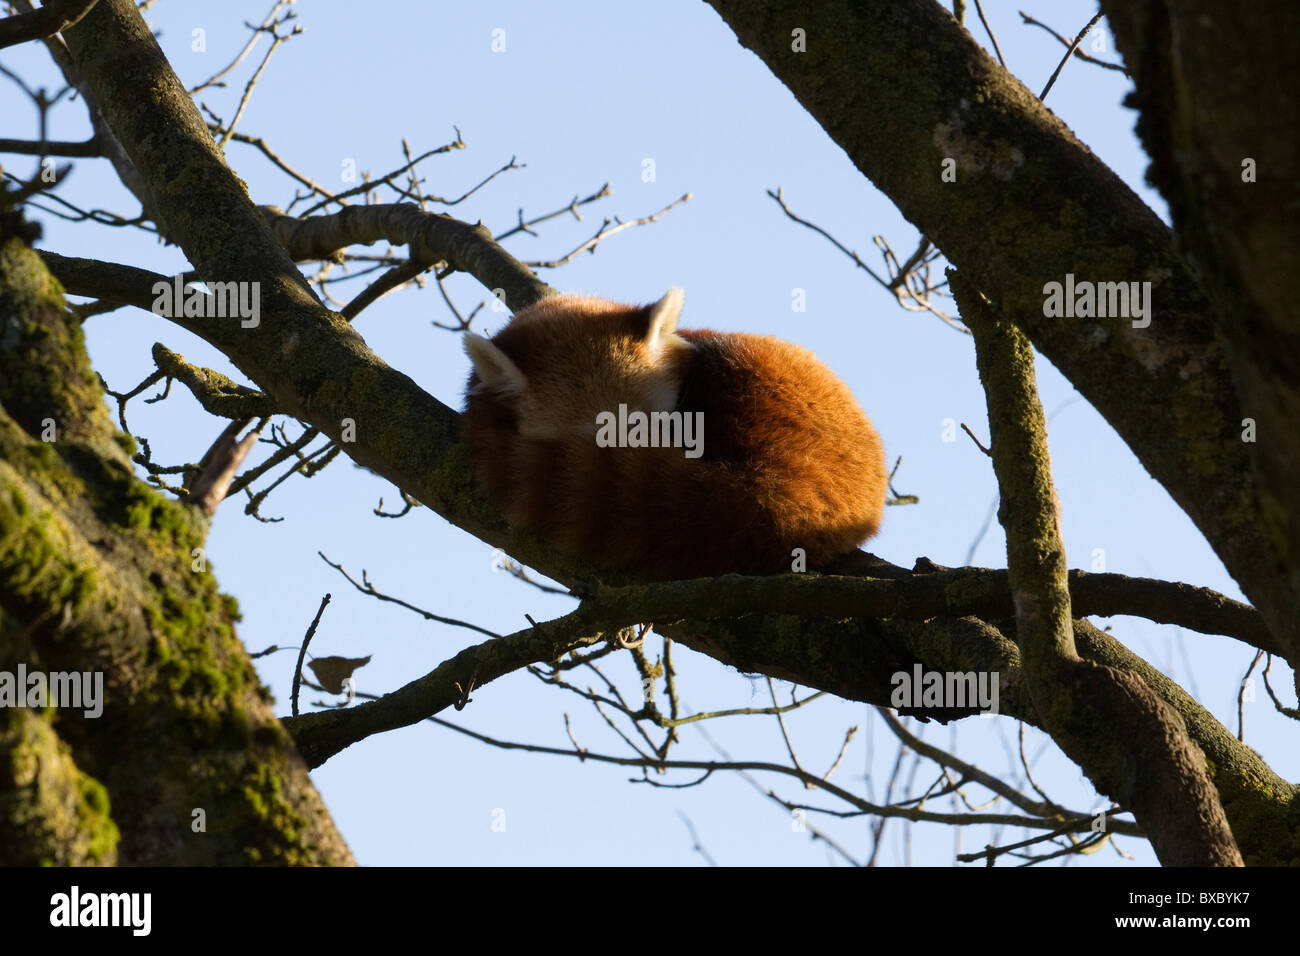 State Animal Of Sikkim High Resolution Stock Photography And Images Alamy